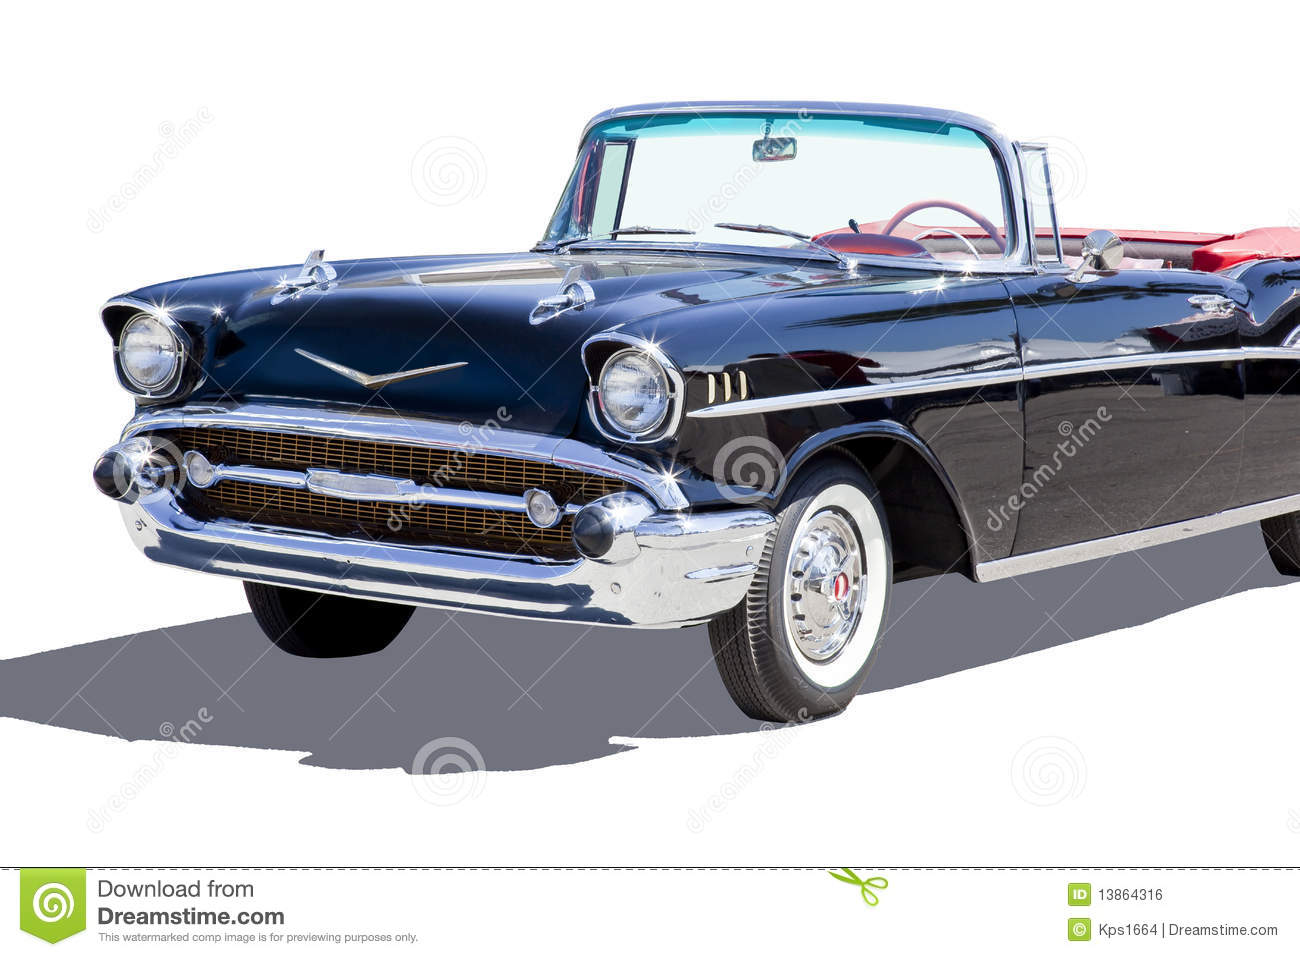 1957 Chevrolet Bel Air Convertible  Restored 3 Speed Automatic Trans